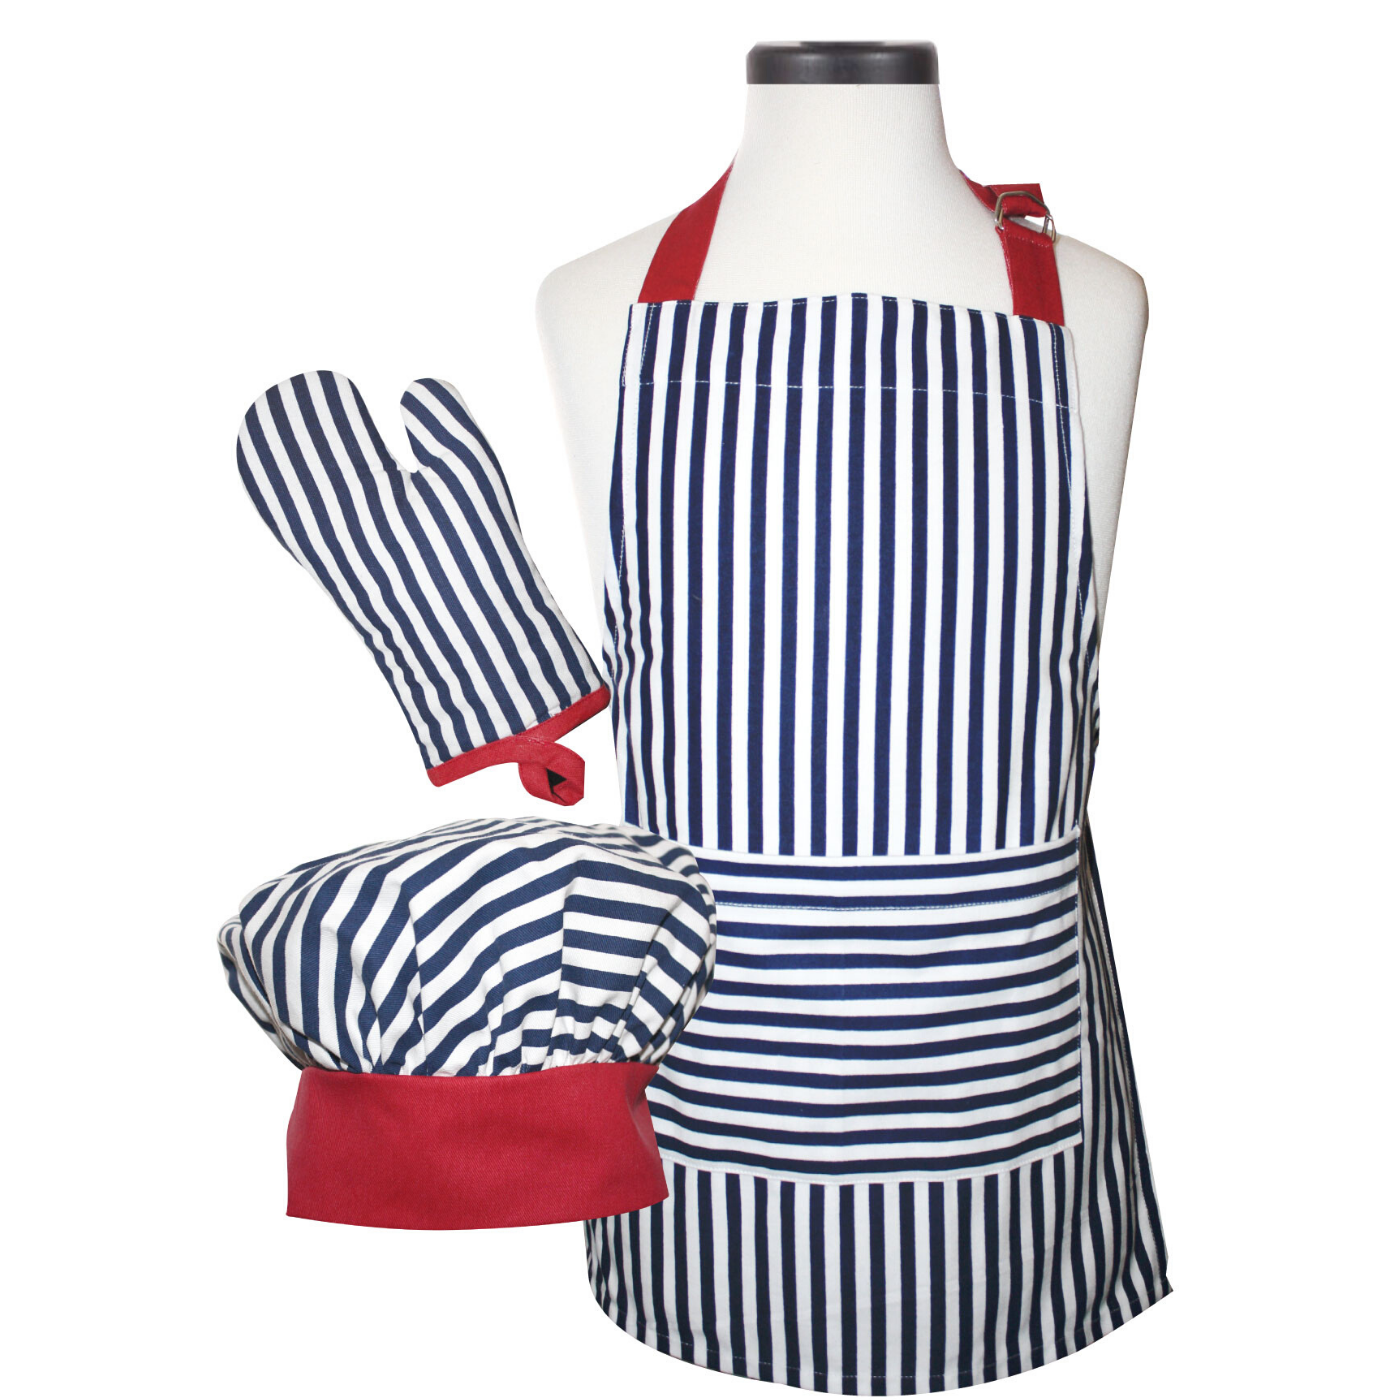 Navy Striped Childs Apron Oven Mitt and Chef&